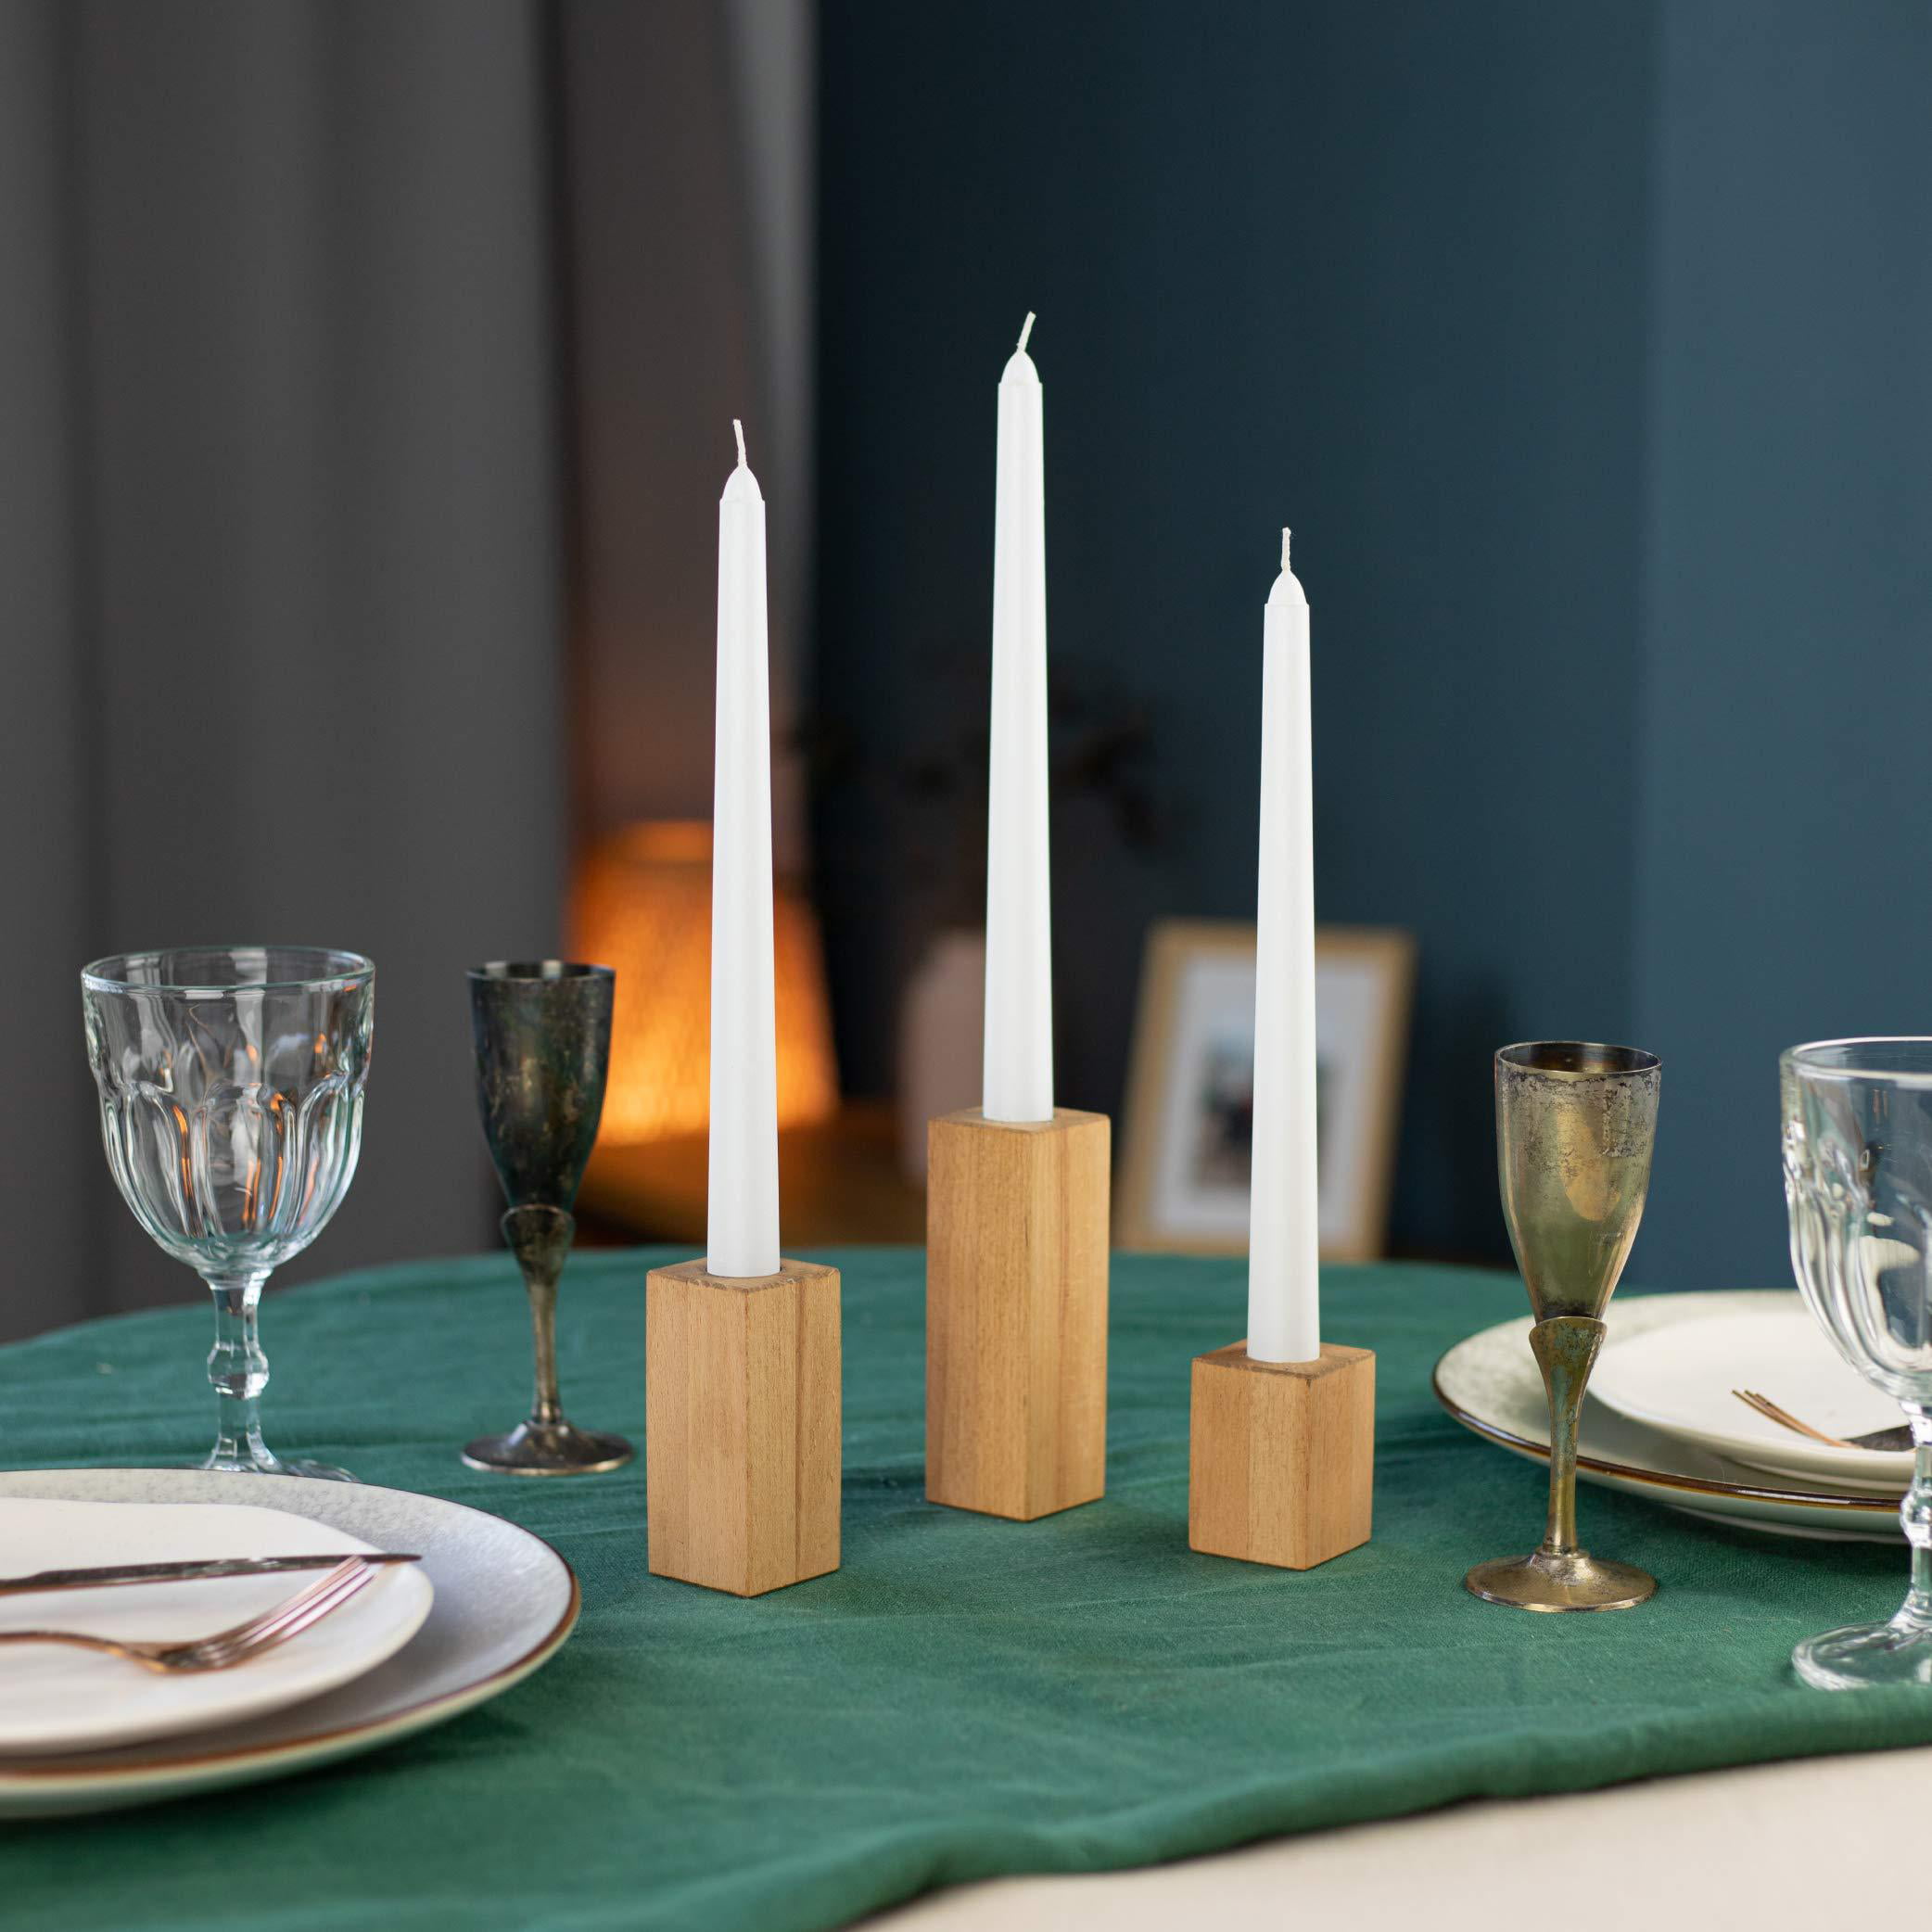 CANDWAX 10 inch Taper Candle Sticks Long Burning Set of 12 - Dripless  Dinner Candles for Table Look Like Matte Metallic Candles and are Ideal for  Any Occasion - White Glitter Taper Candles - Walmart.com